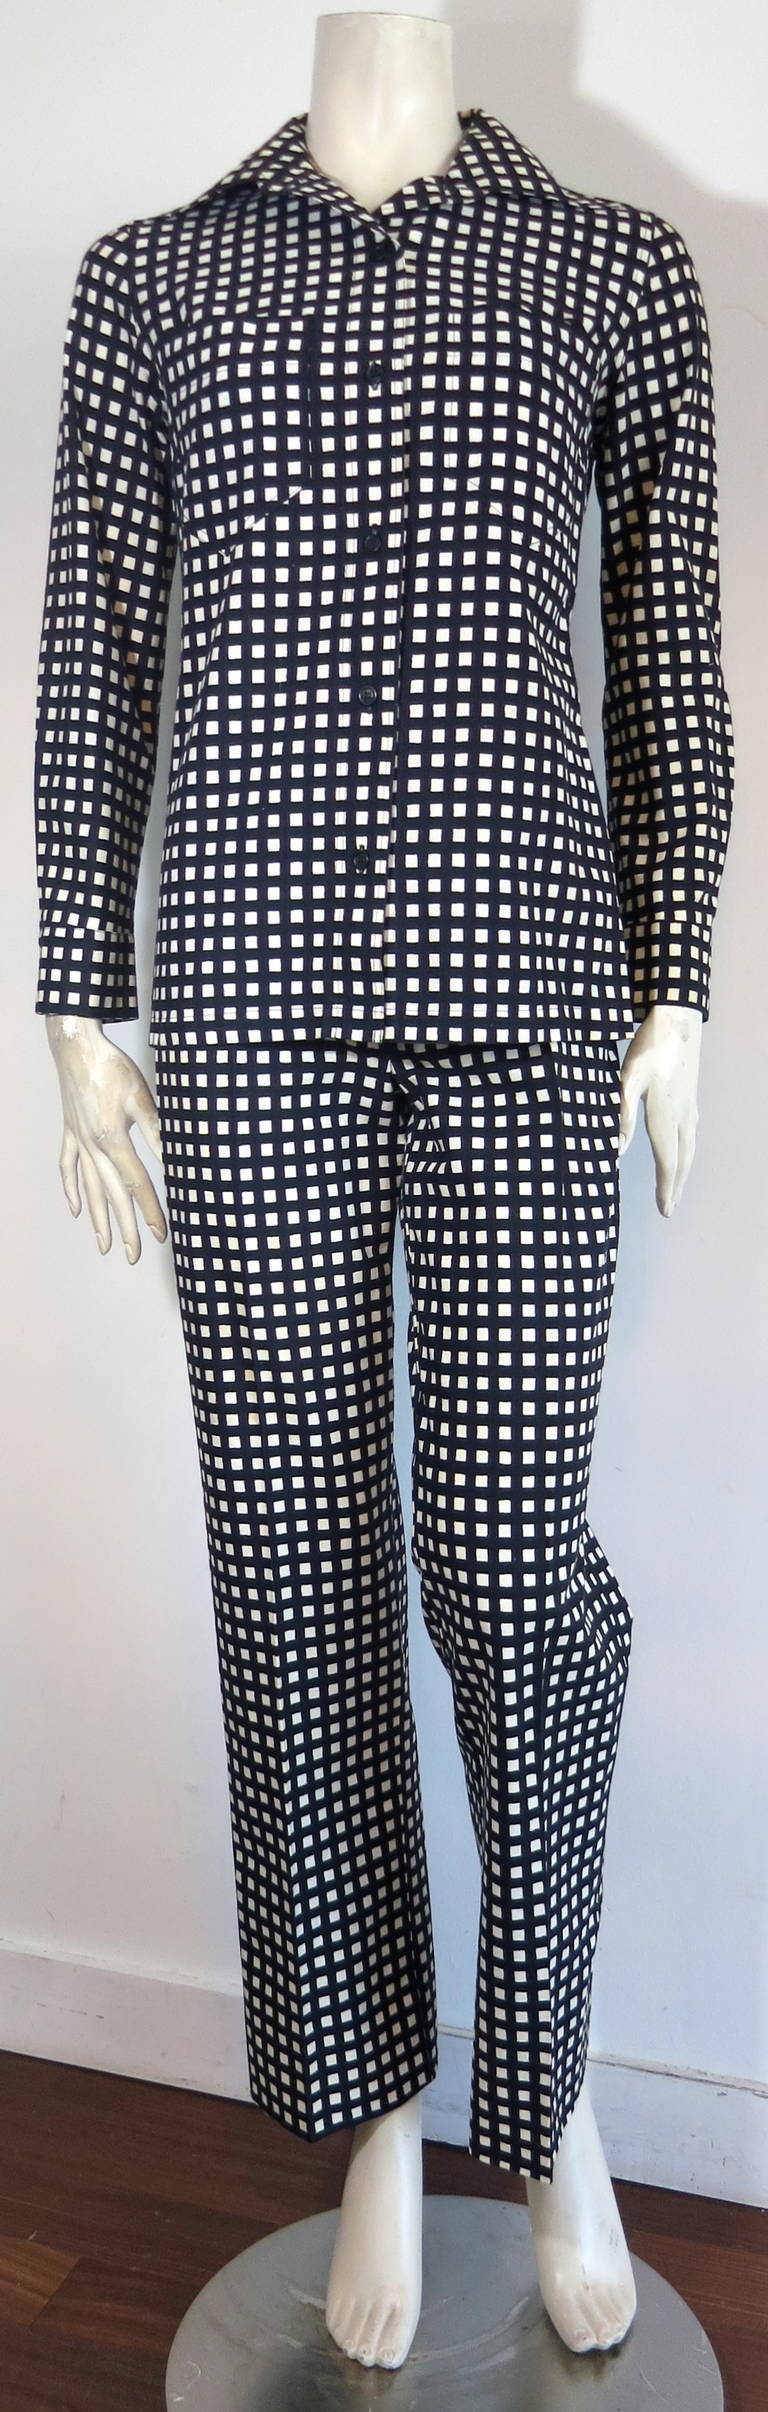 1973 MARIMEKKO OY FINLAND Black & white shirt & pant set In Excellent Condition For Sale In Newport Beach, CA